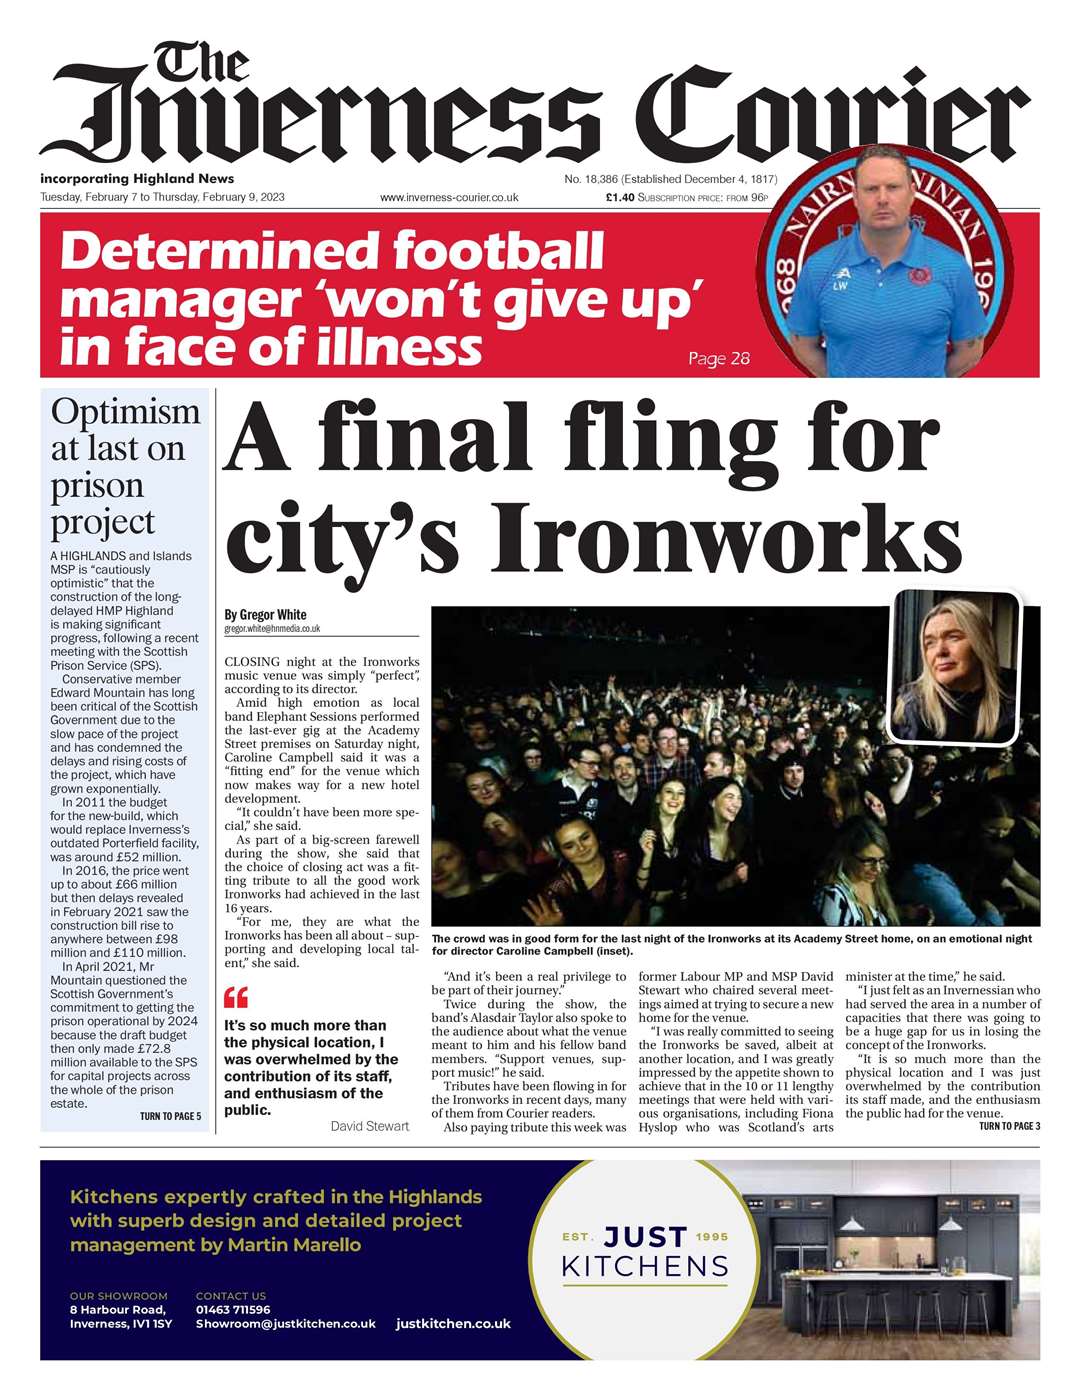 The Inverness Courier, February 7, front page.